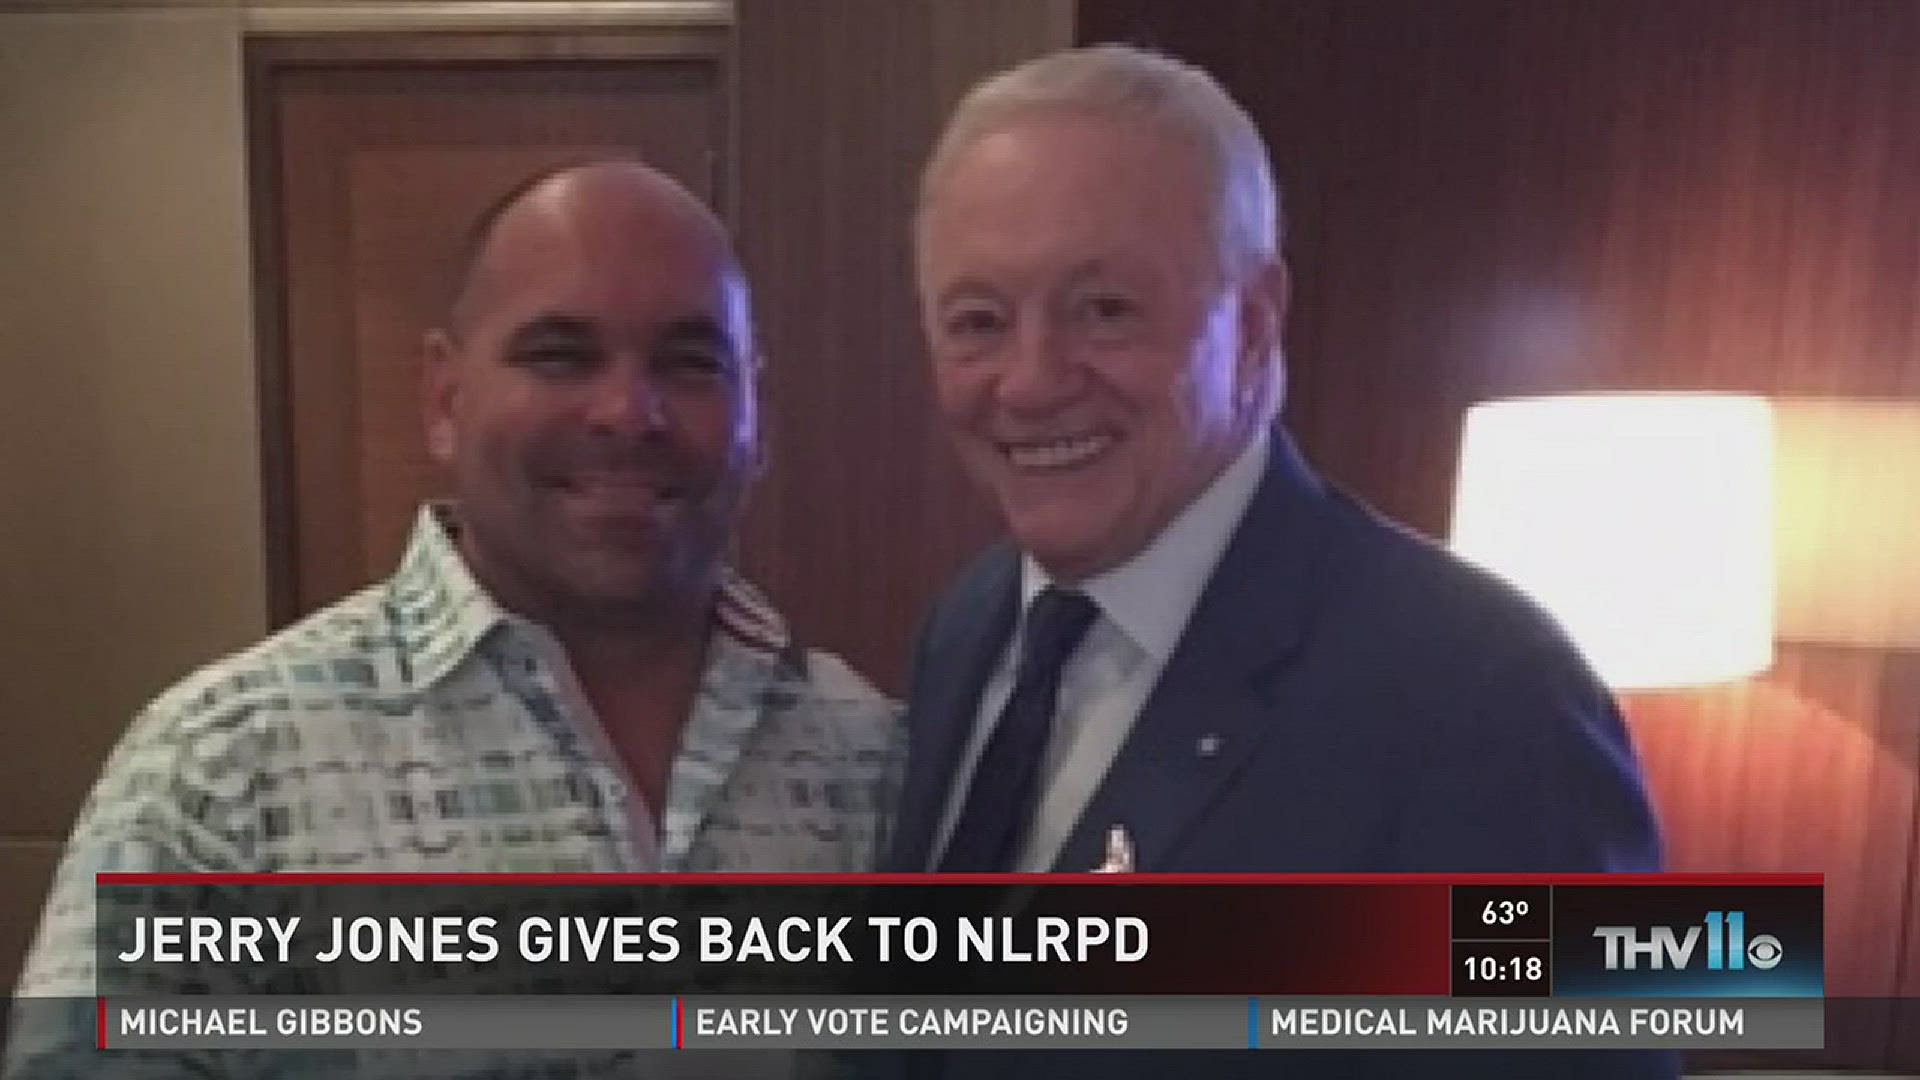 Jerry Jones gives back to NLRPD